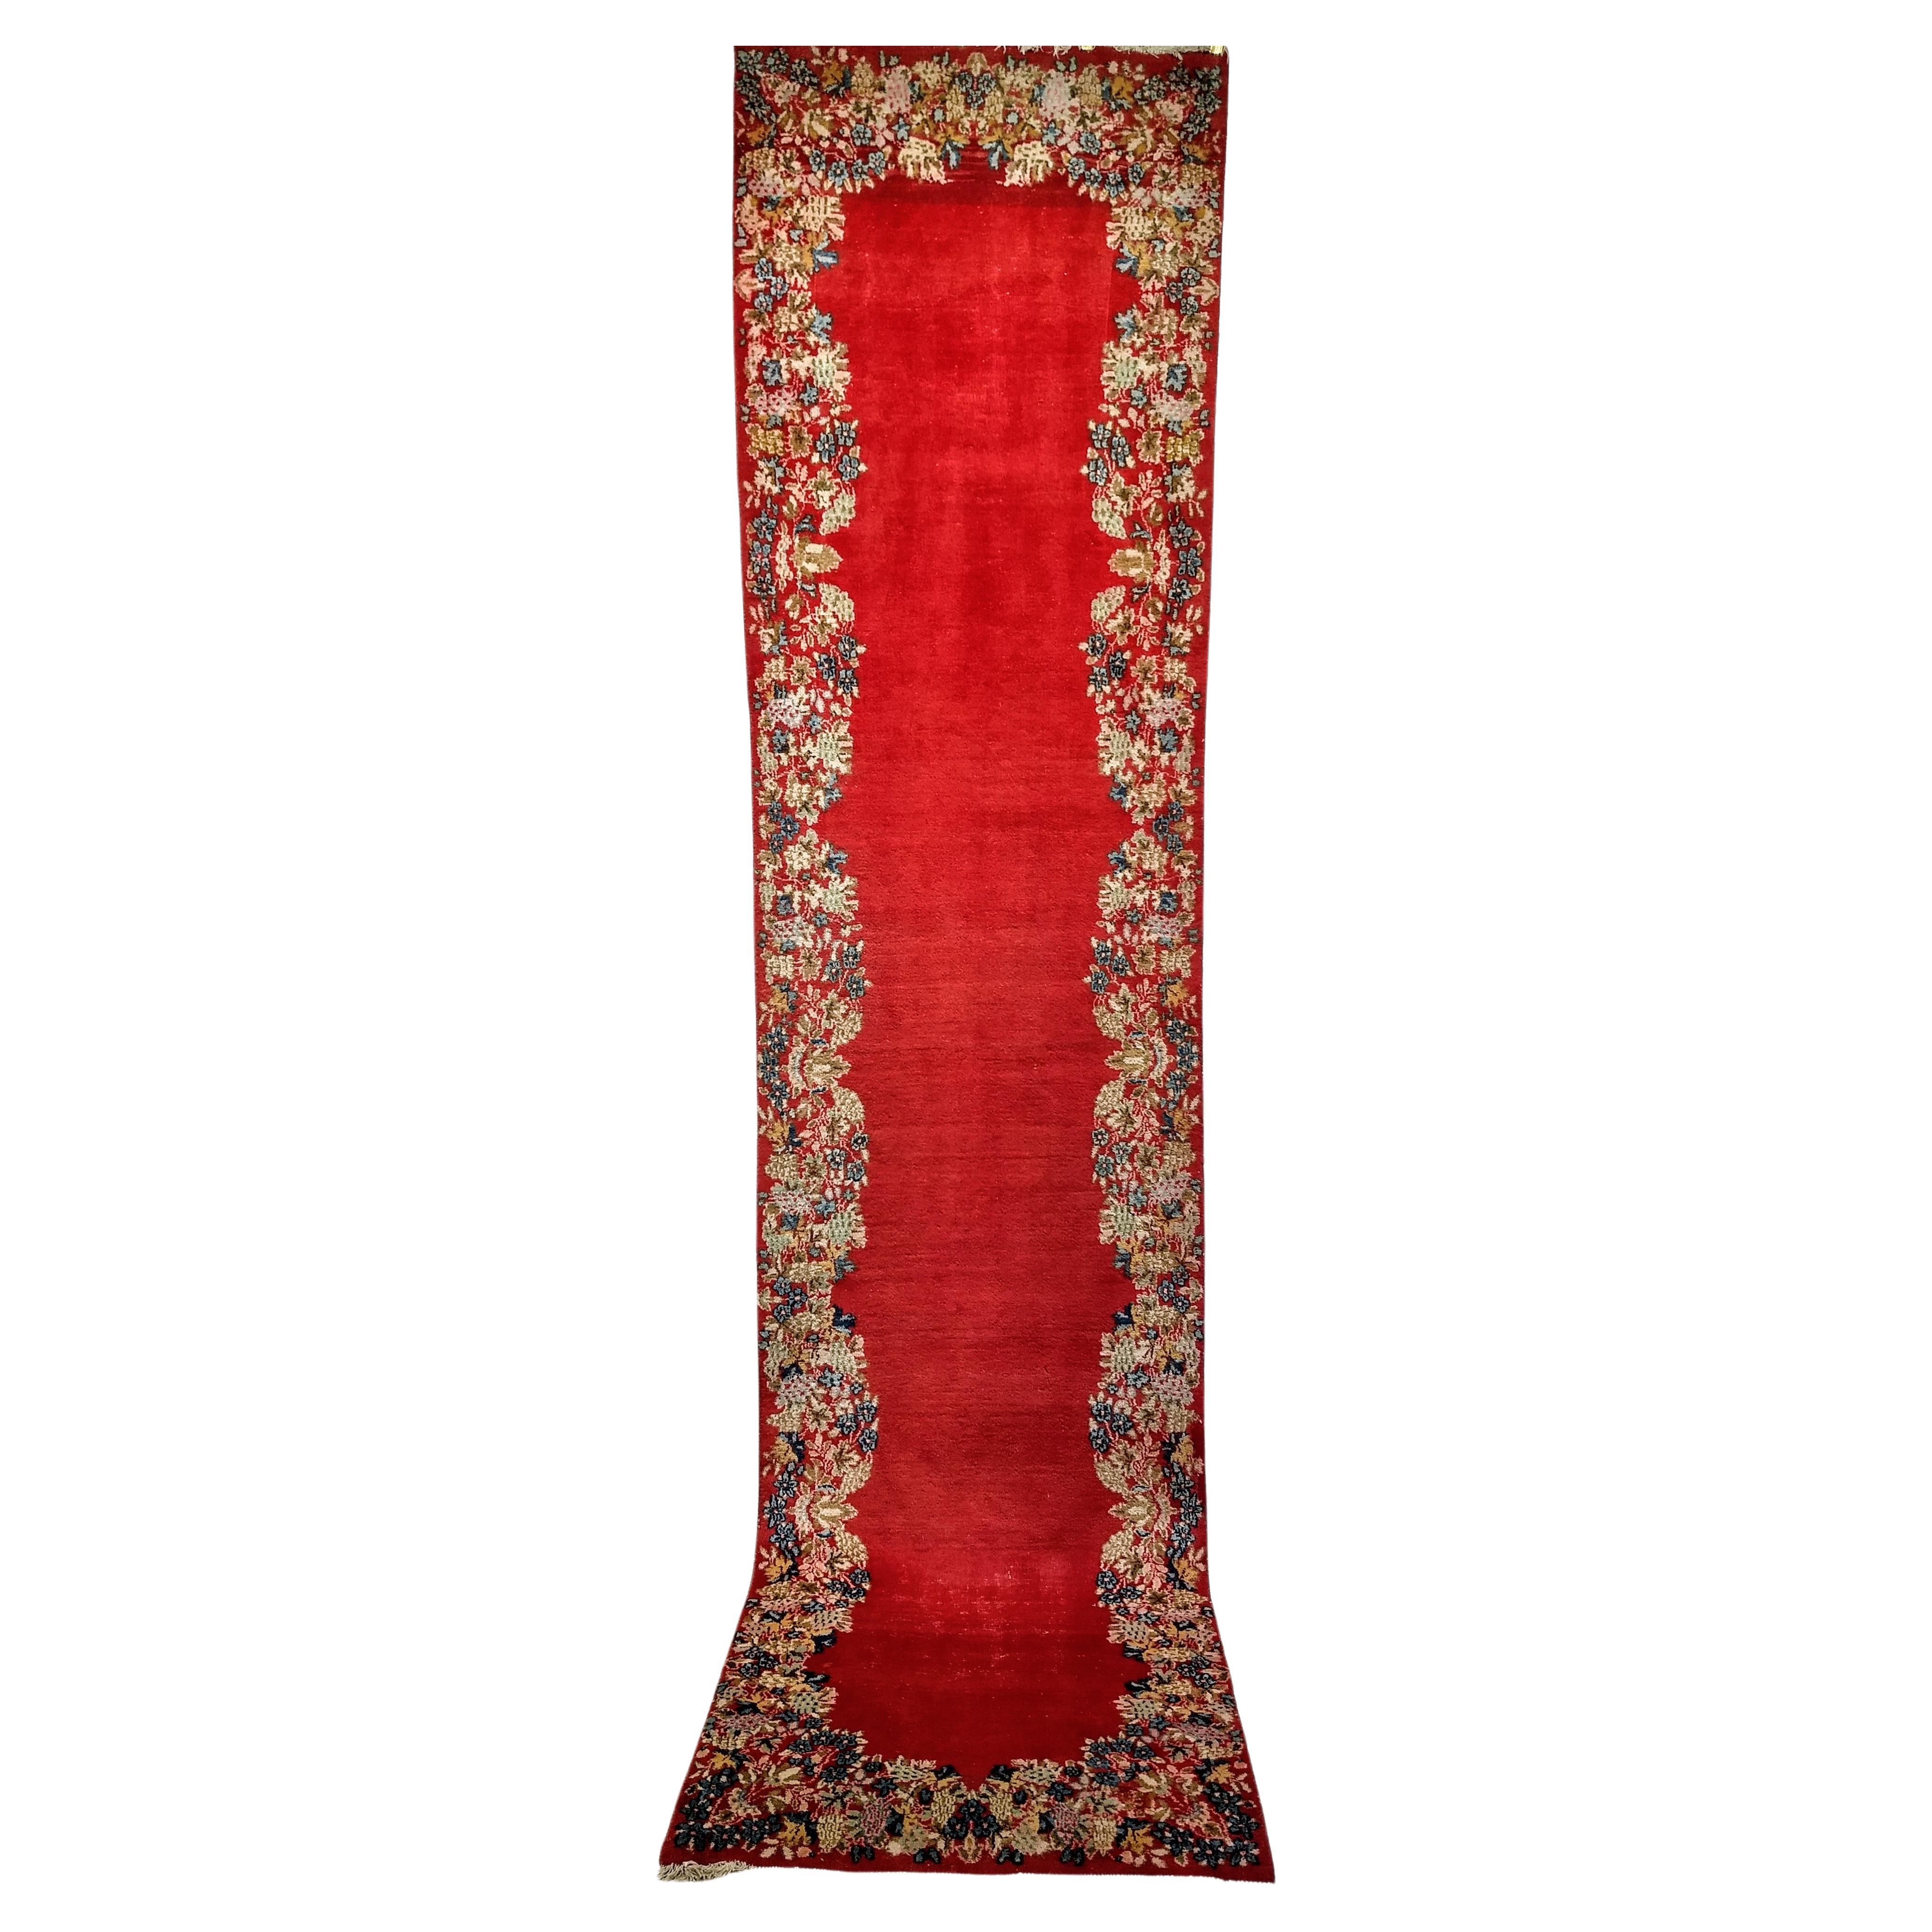  Vintage Persian Kerman Runner, an Open Field and Floral Bouquets Border Pattern.   Kerman rugs from southern Persia are desired for their use of floral bouquets in their designs. The city of Kerman, located as a major stop on the ancient silk road